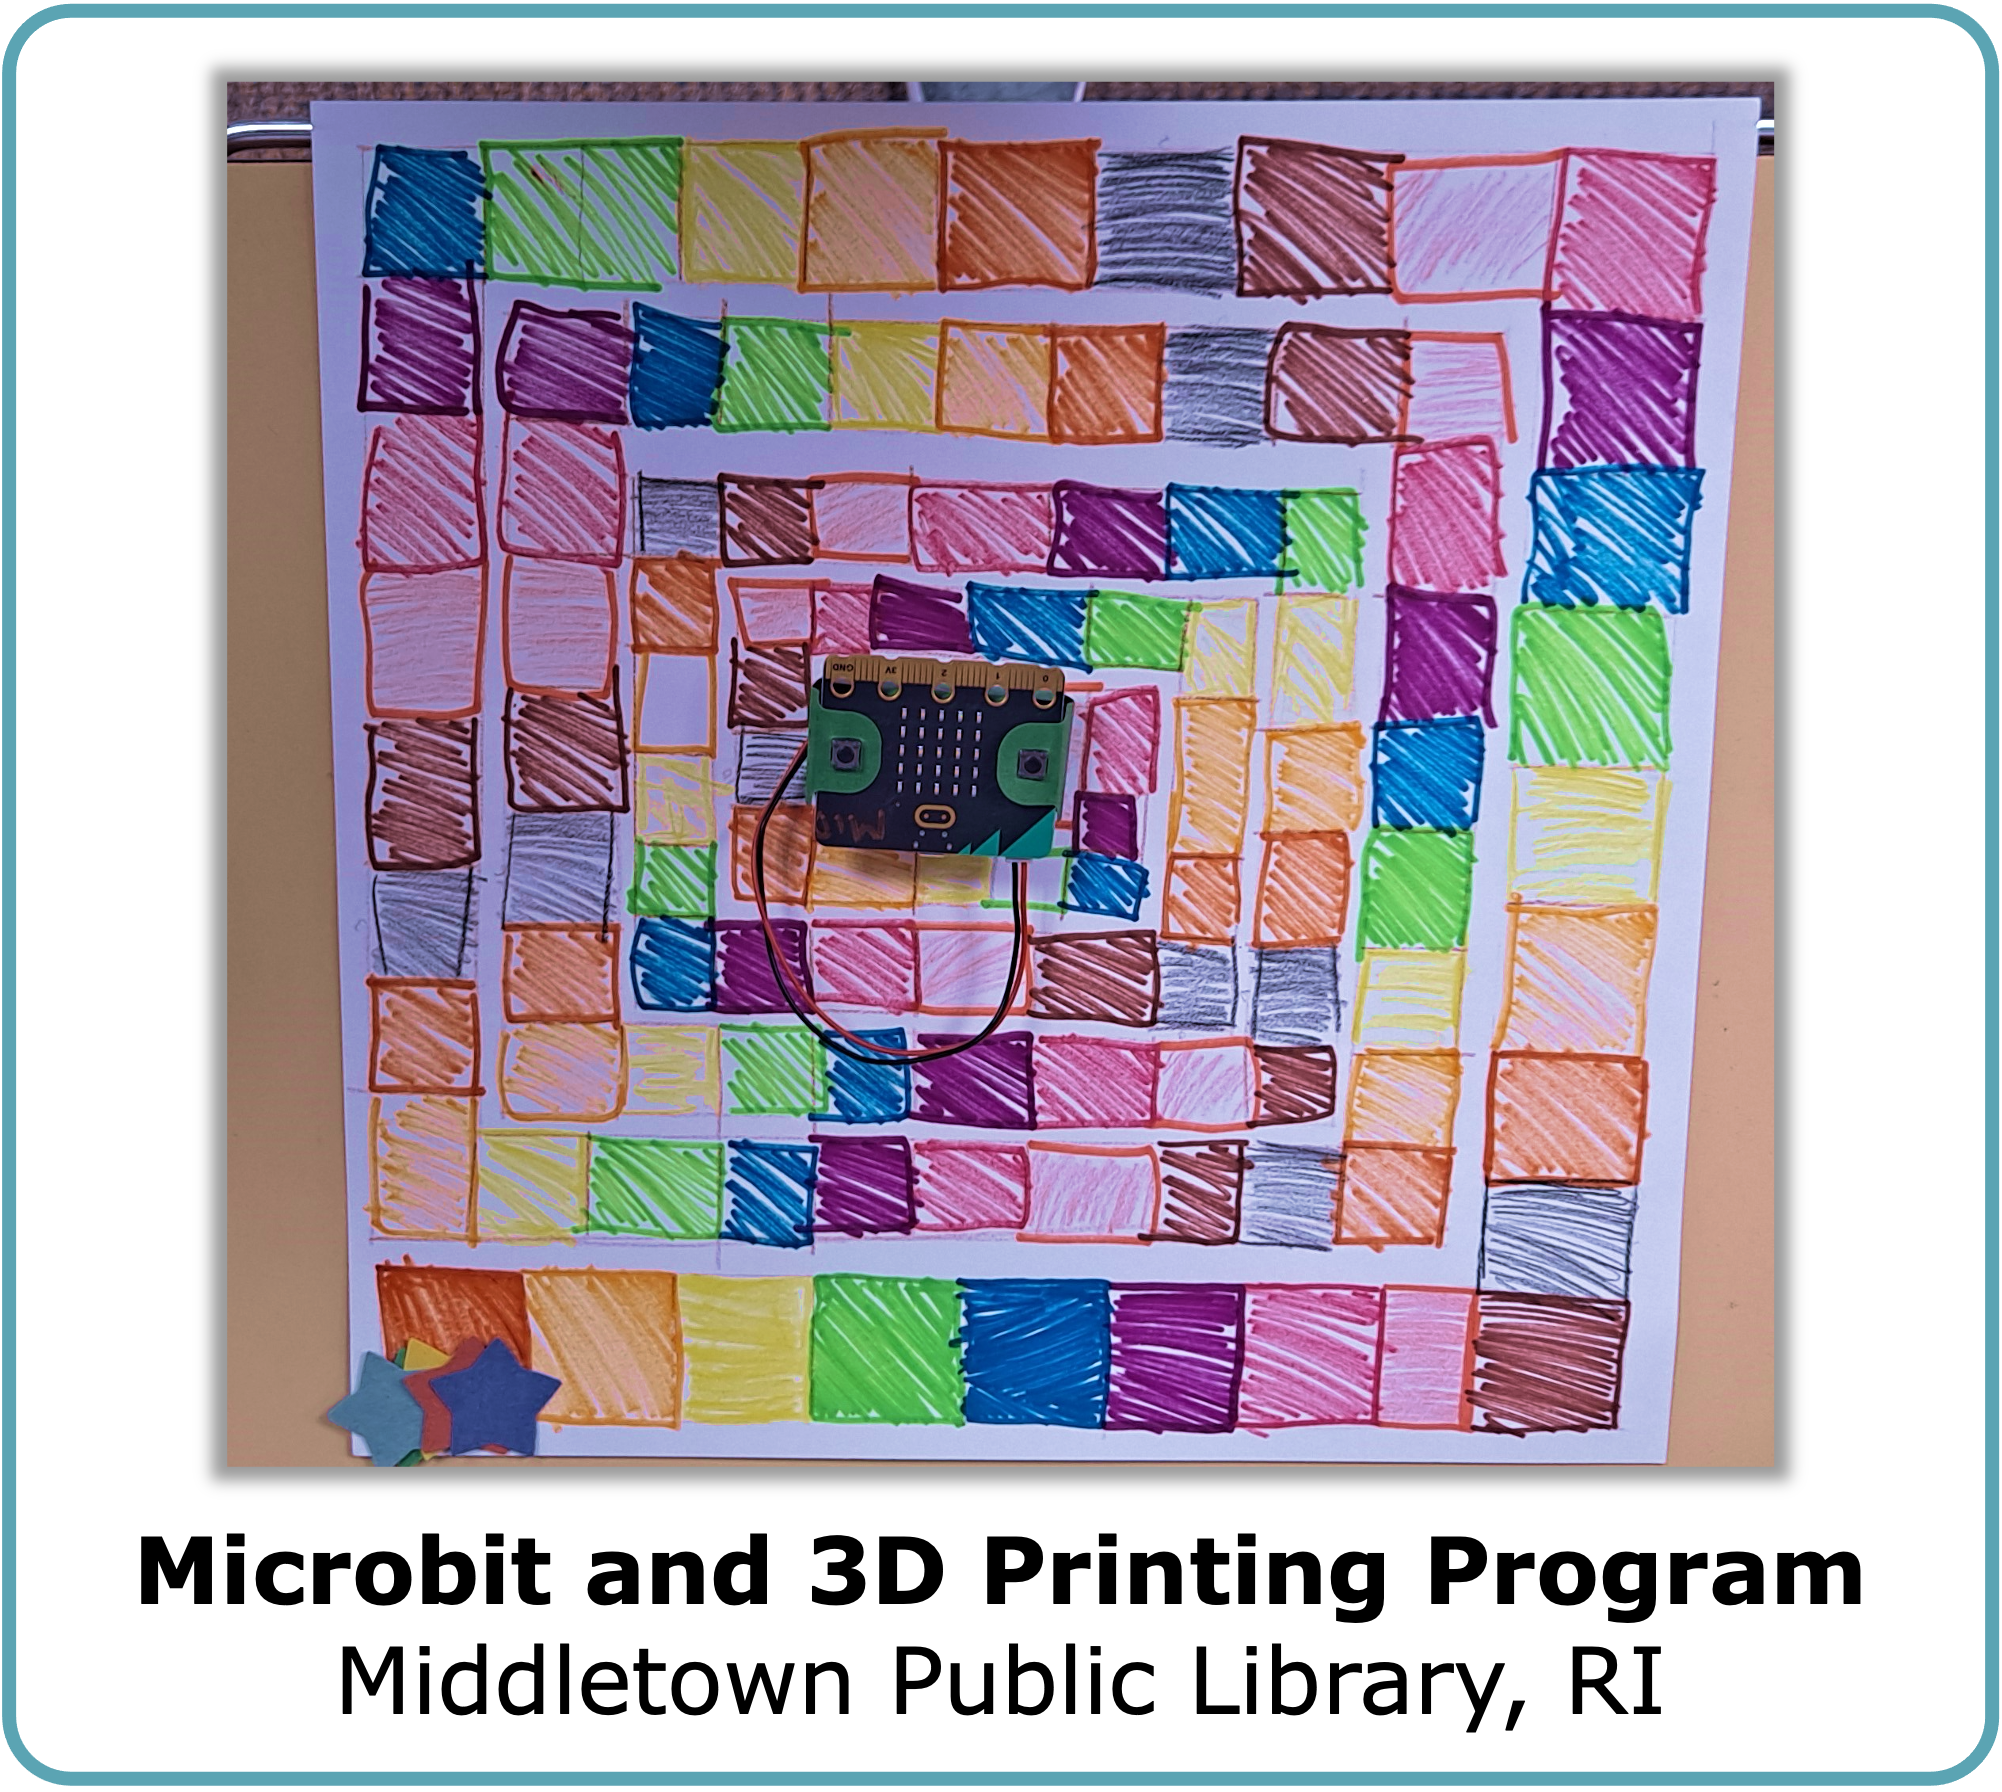 Click to open the case study of the microbit and 3D printing program at Middletown Public Library in Rhode Island. 